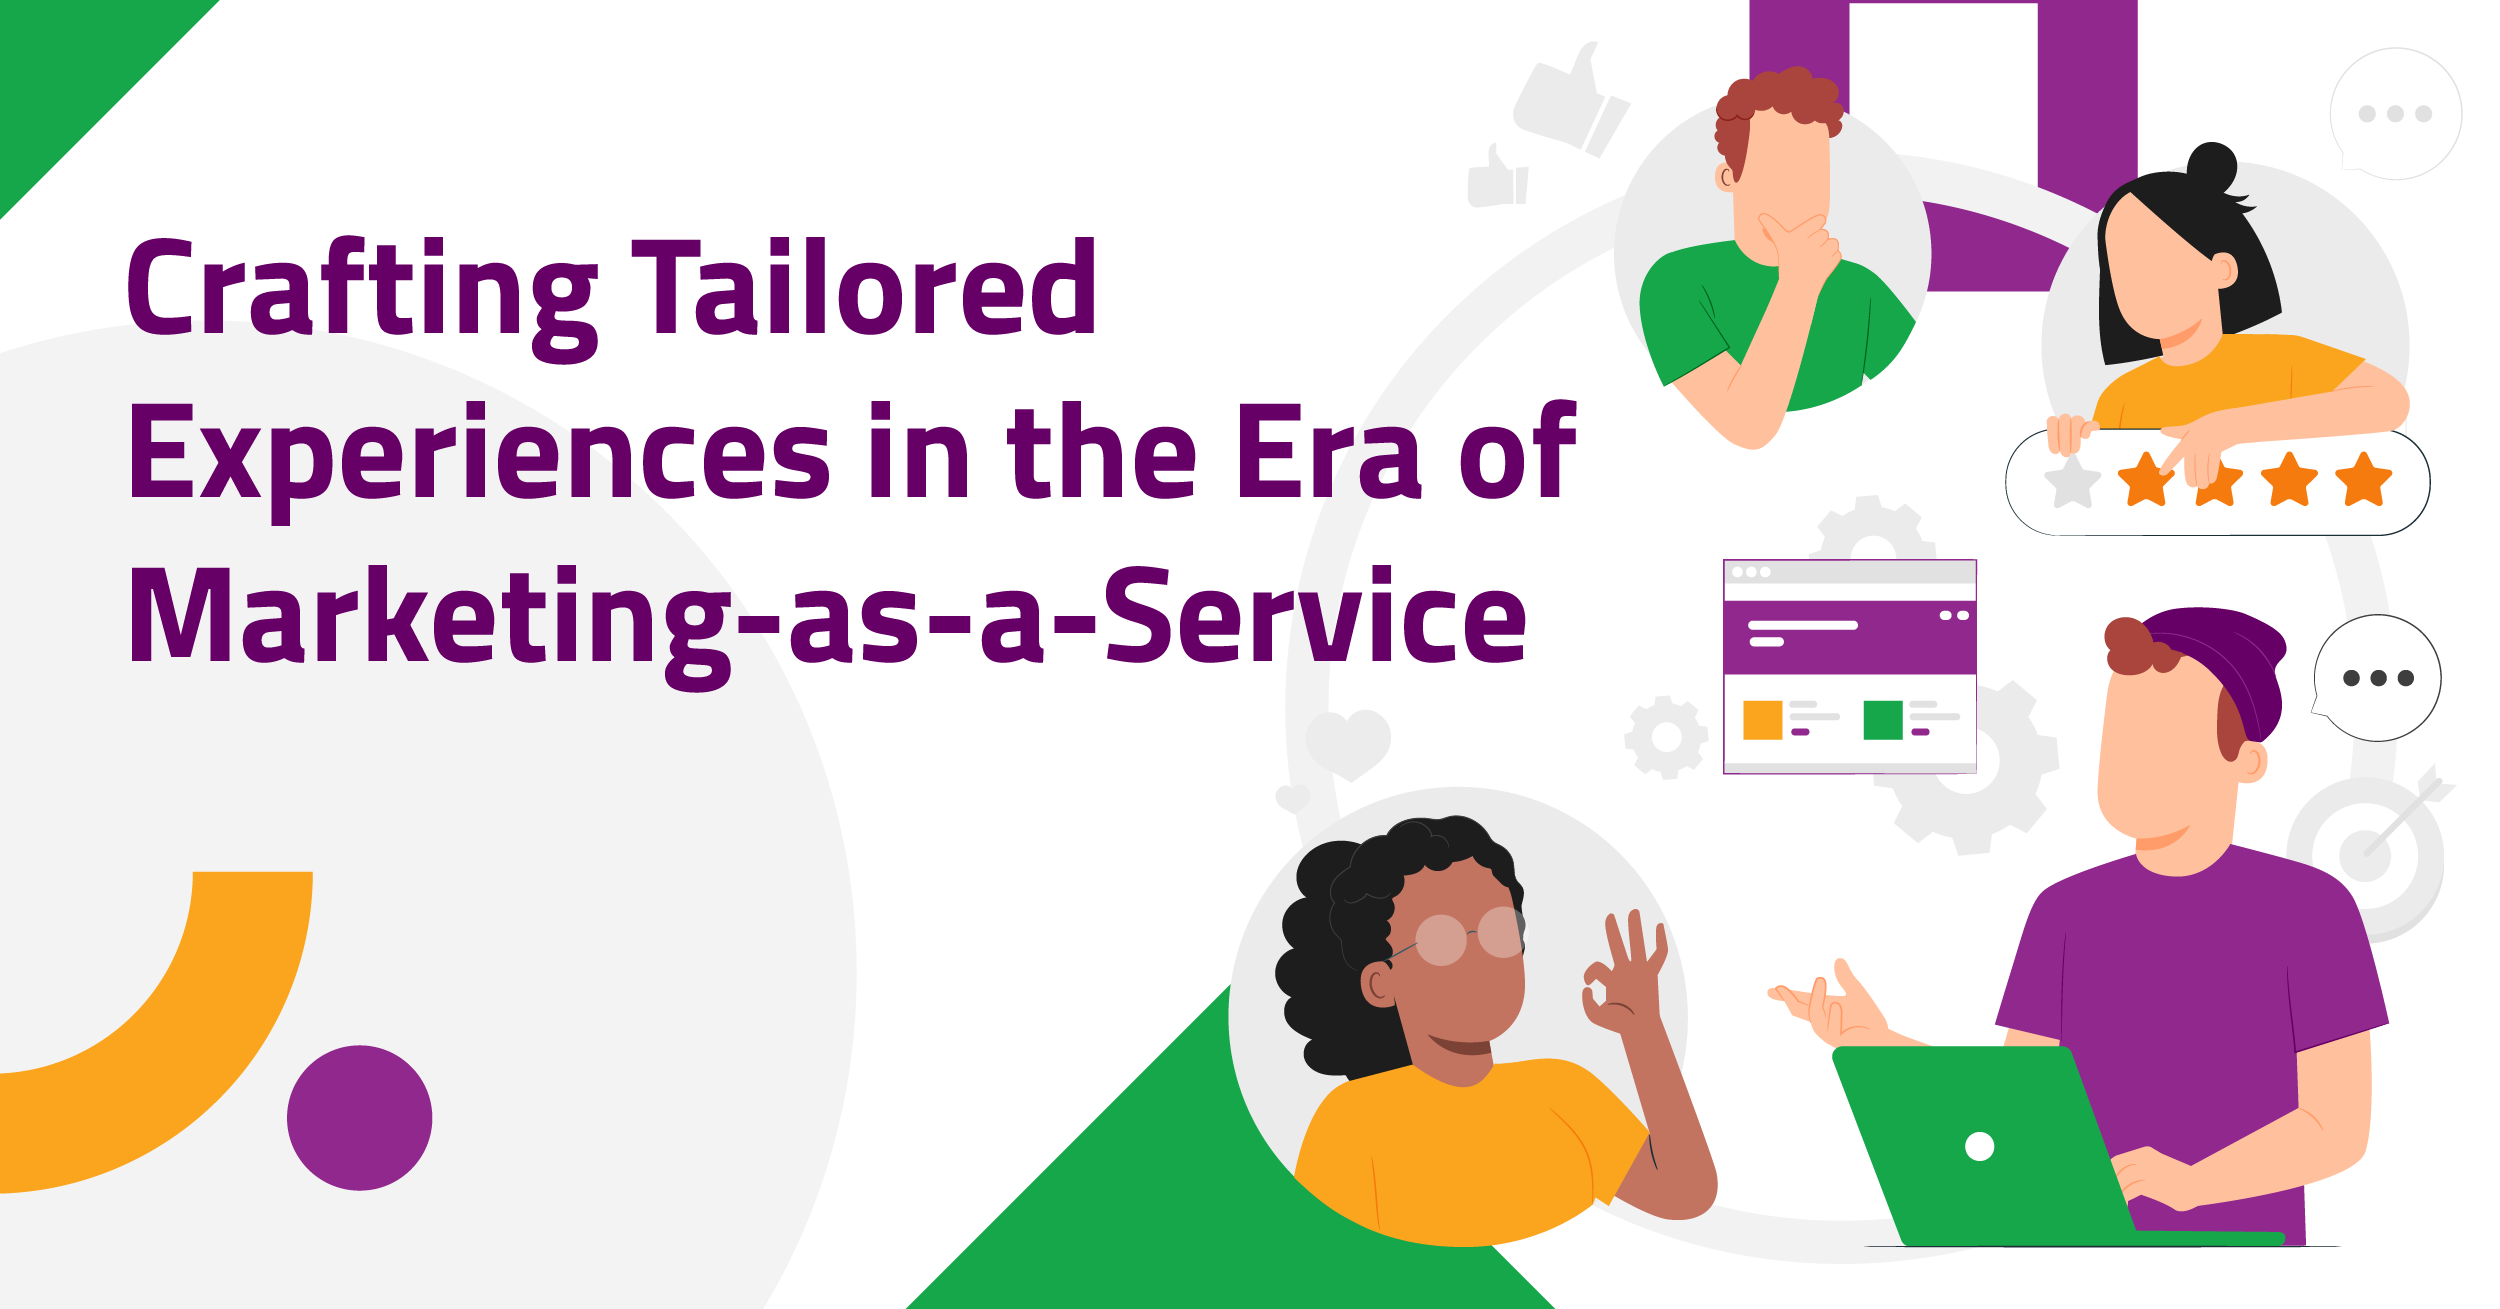 Crafting Tailored Experiences in the Era of Marketing-as-a-Service